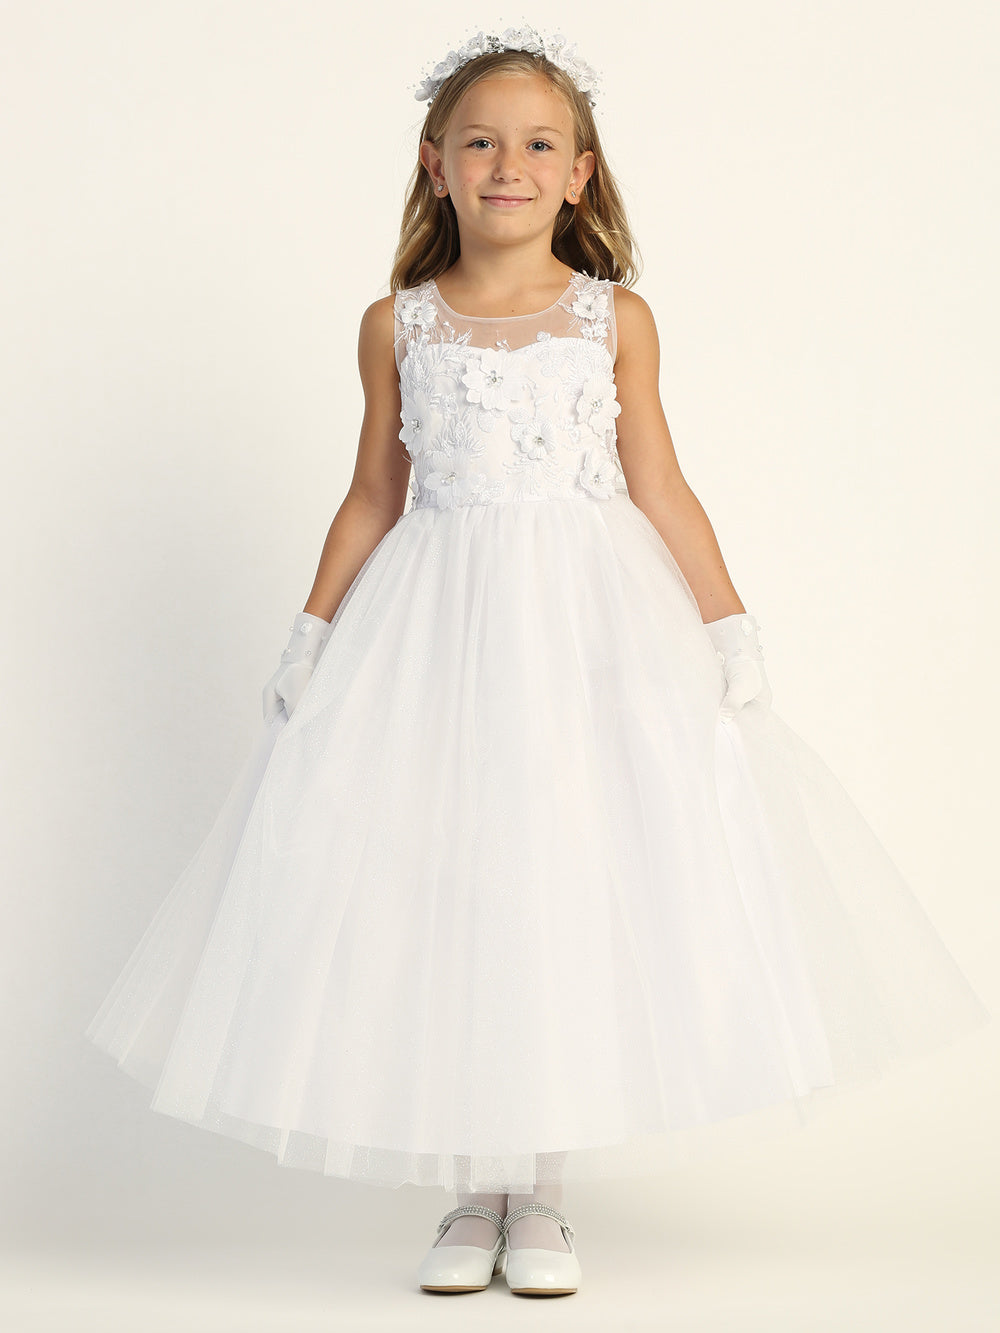 A girl wearing a beautiful white First Communion Dress with embroidered tulle and 3D flowers.